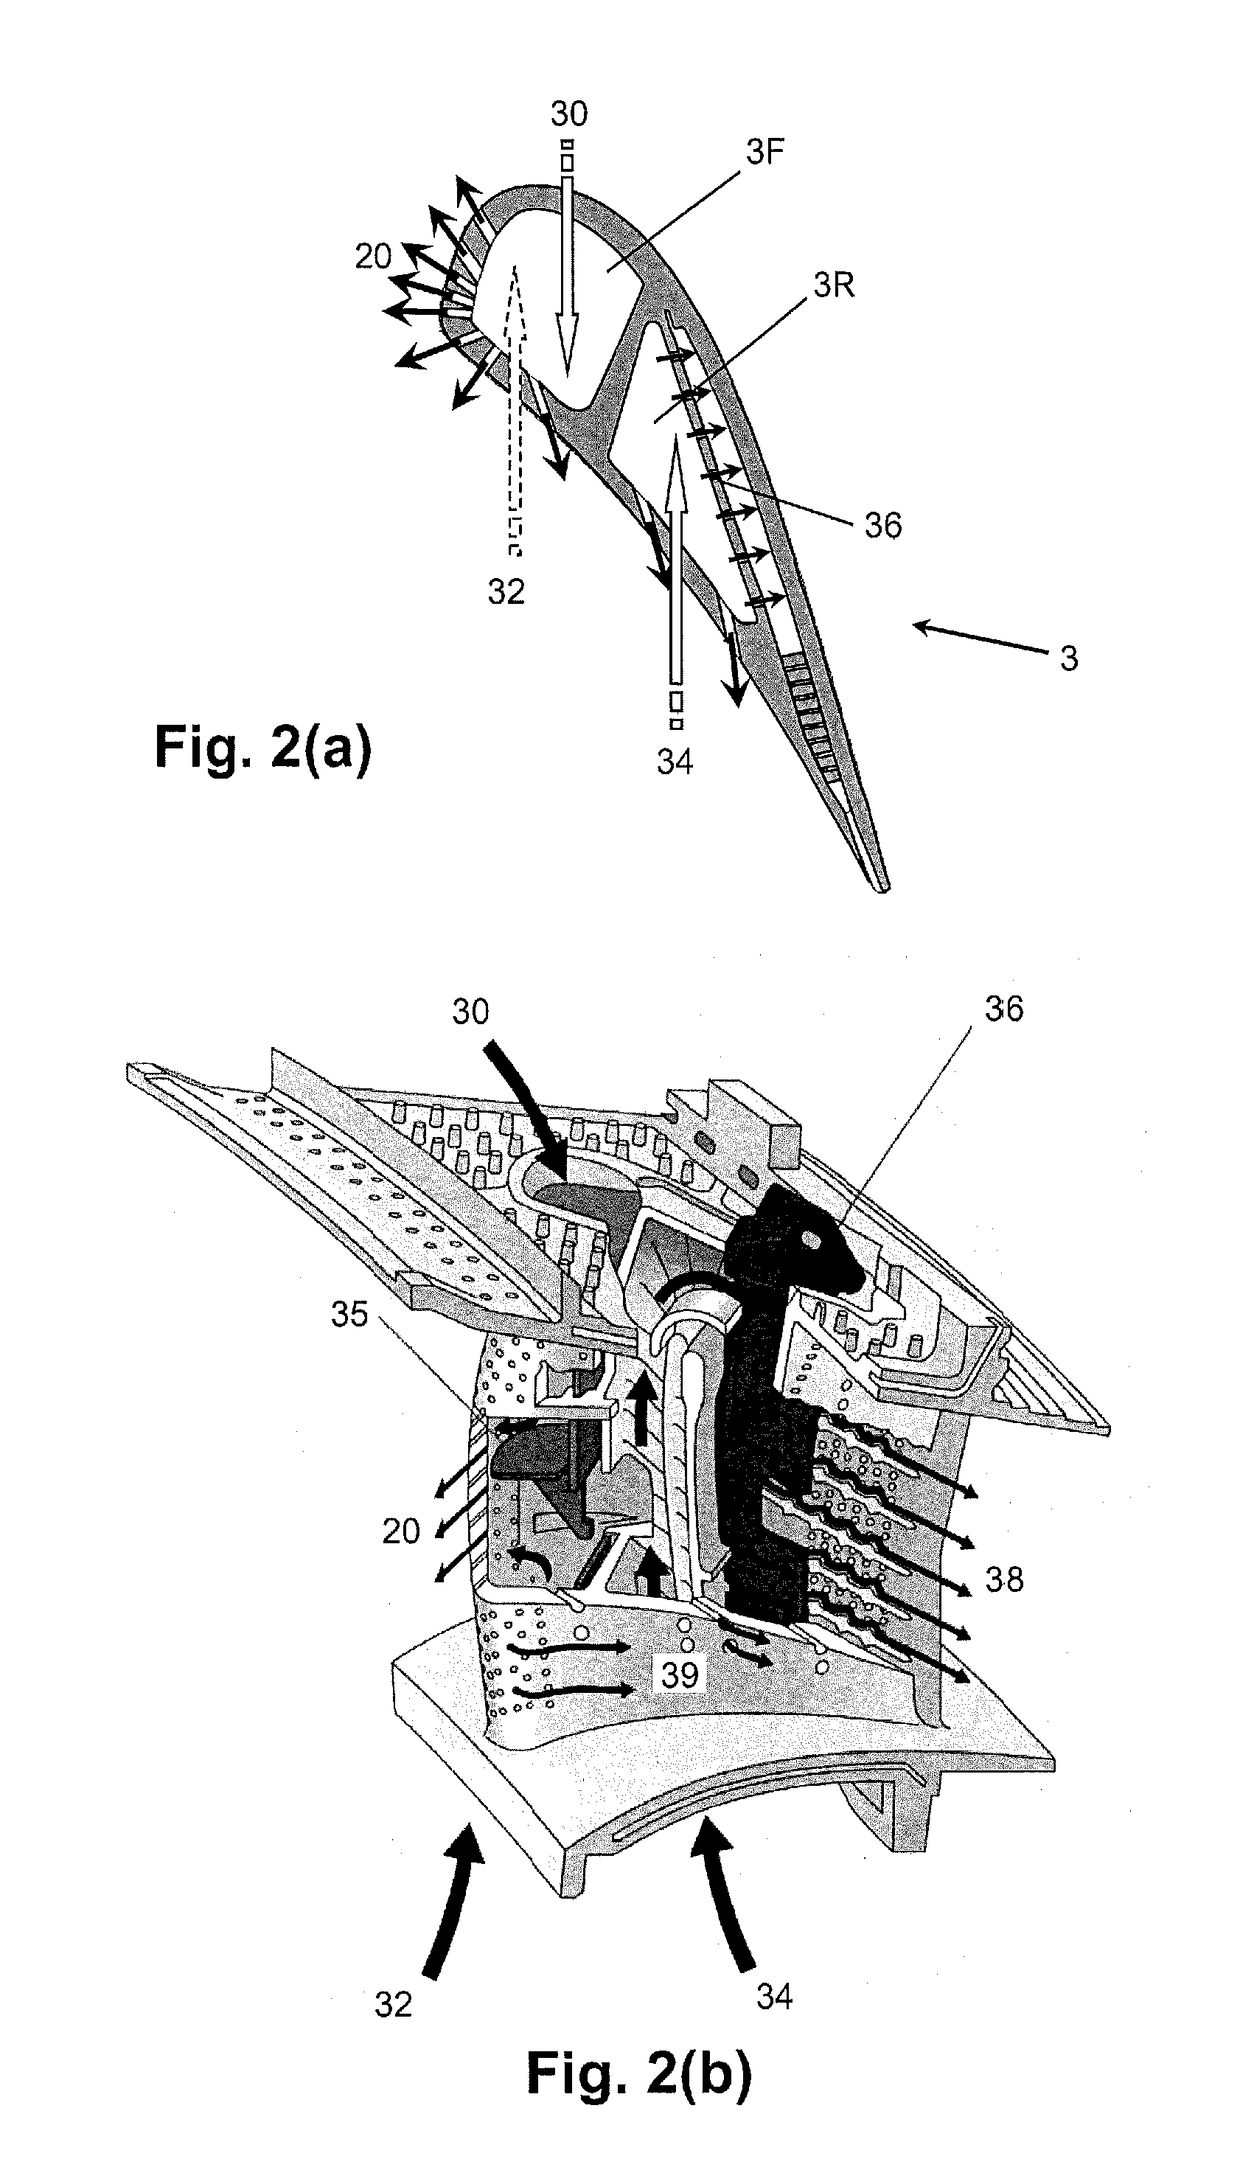 Internal cooling of engine components